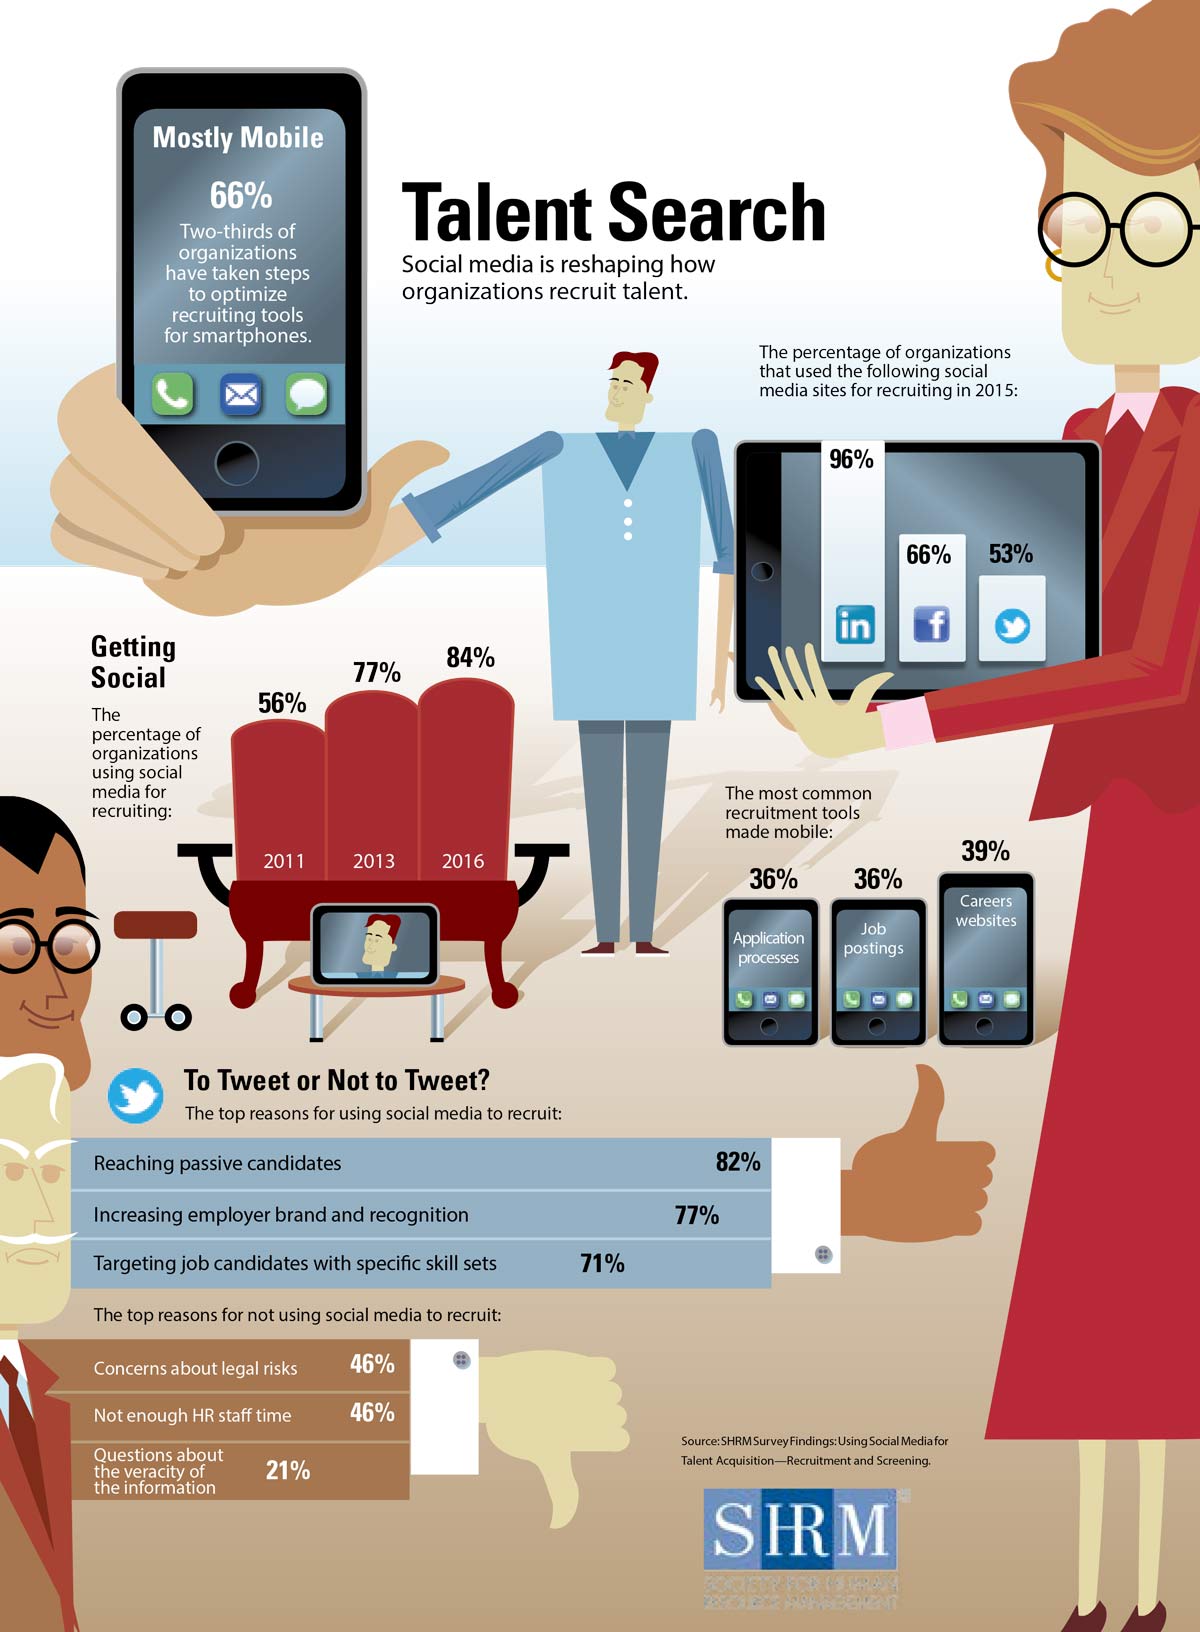 Social media is reshaping how organizations recruit talent.